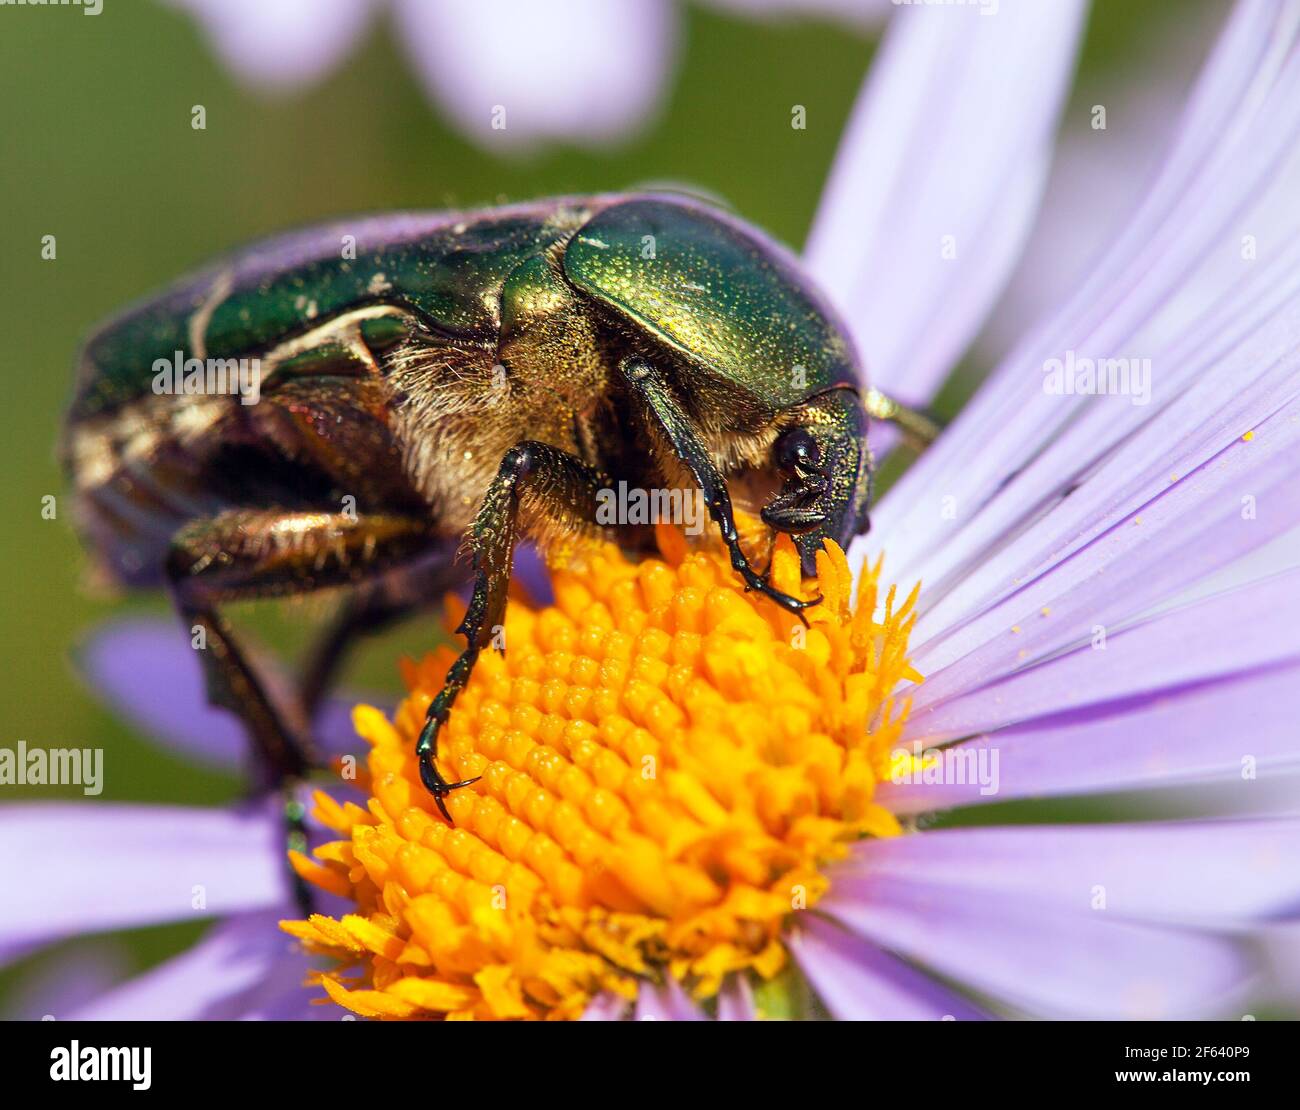 green rose chafer in latin cetonia aurata - insect sitting and pollinated  yellow violet or blue flower Stock Photo